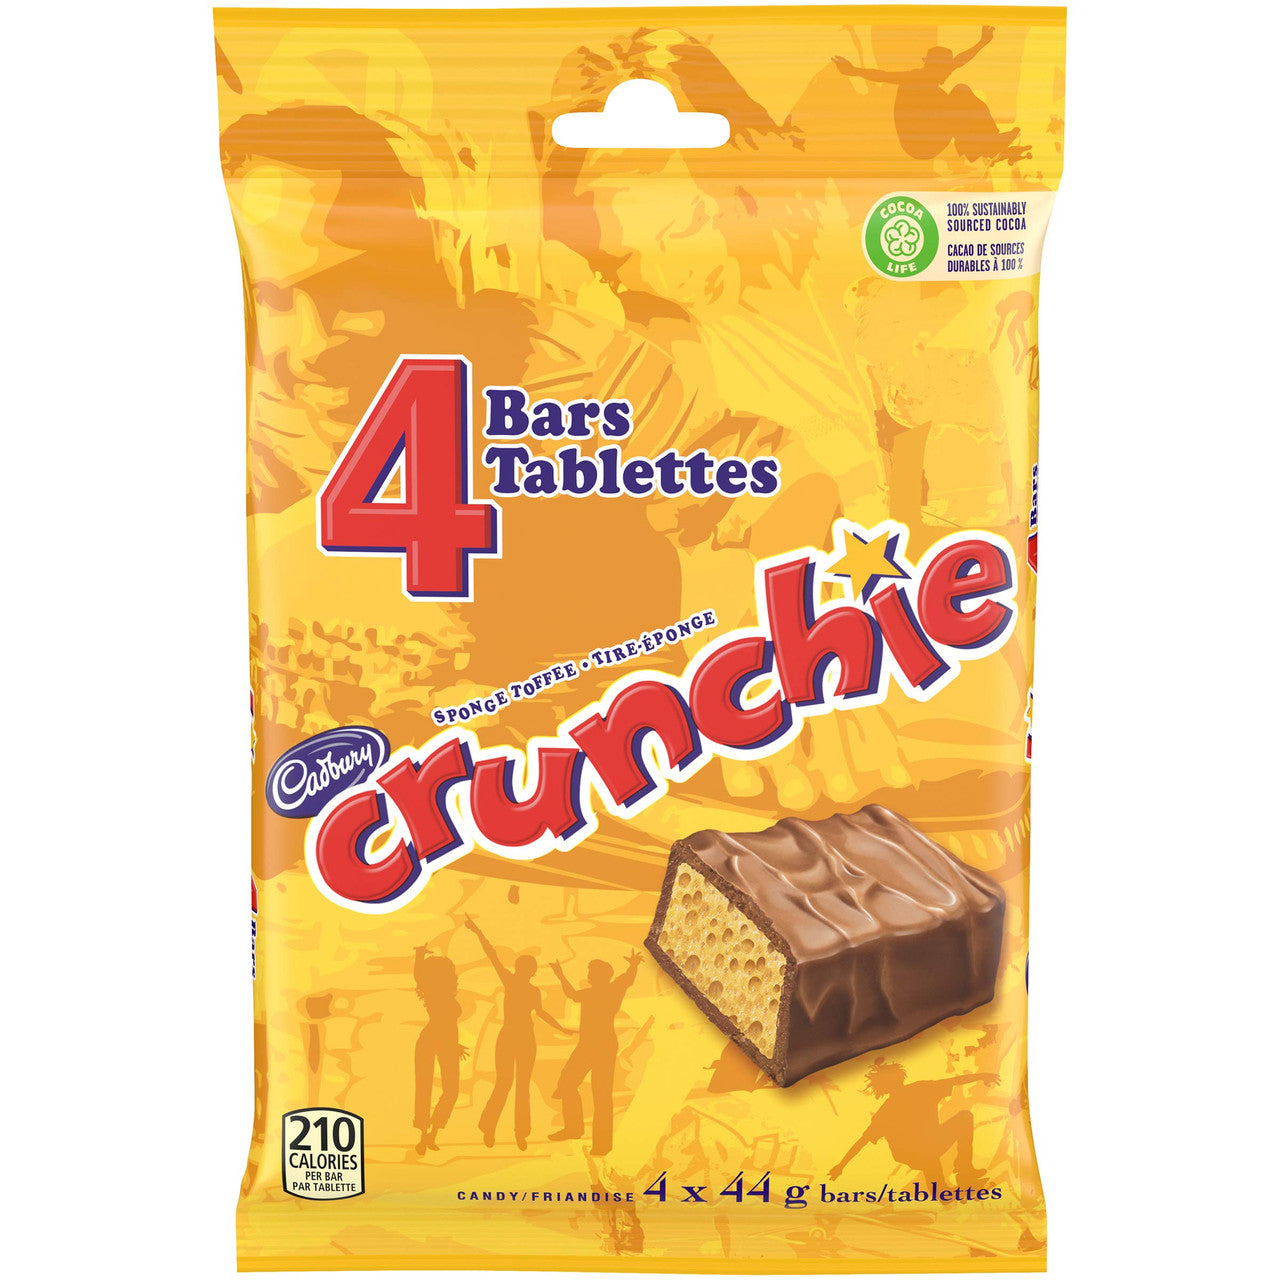 Cadbury Crunchie Chocolate Candy Bars, 4 Count, Imported from Canada